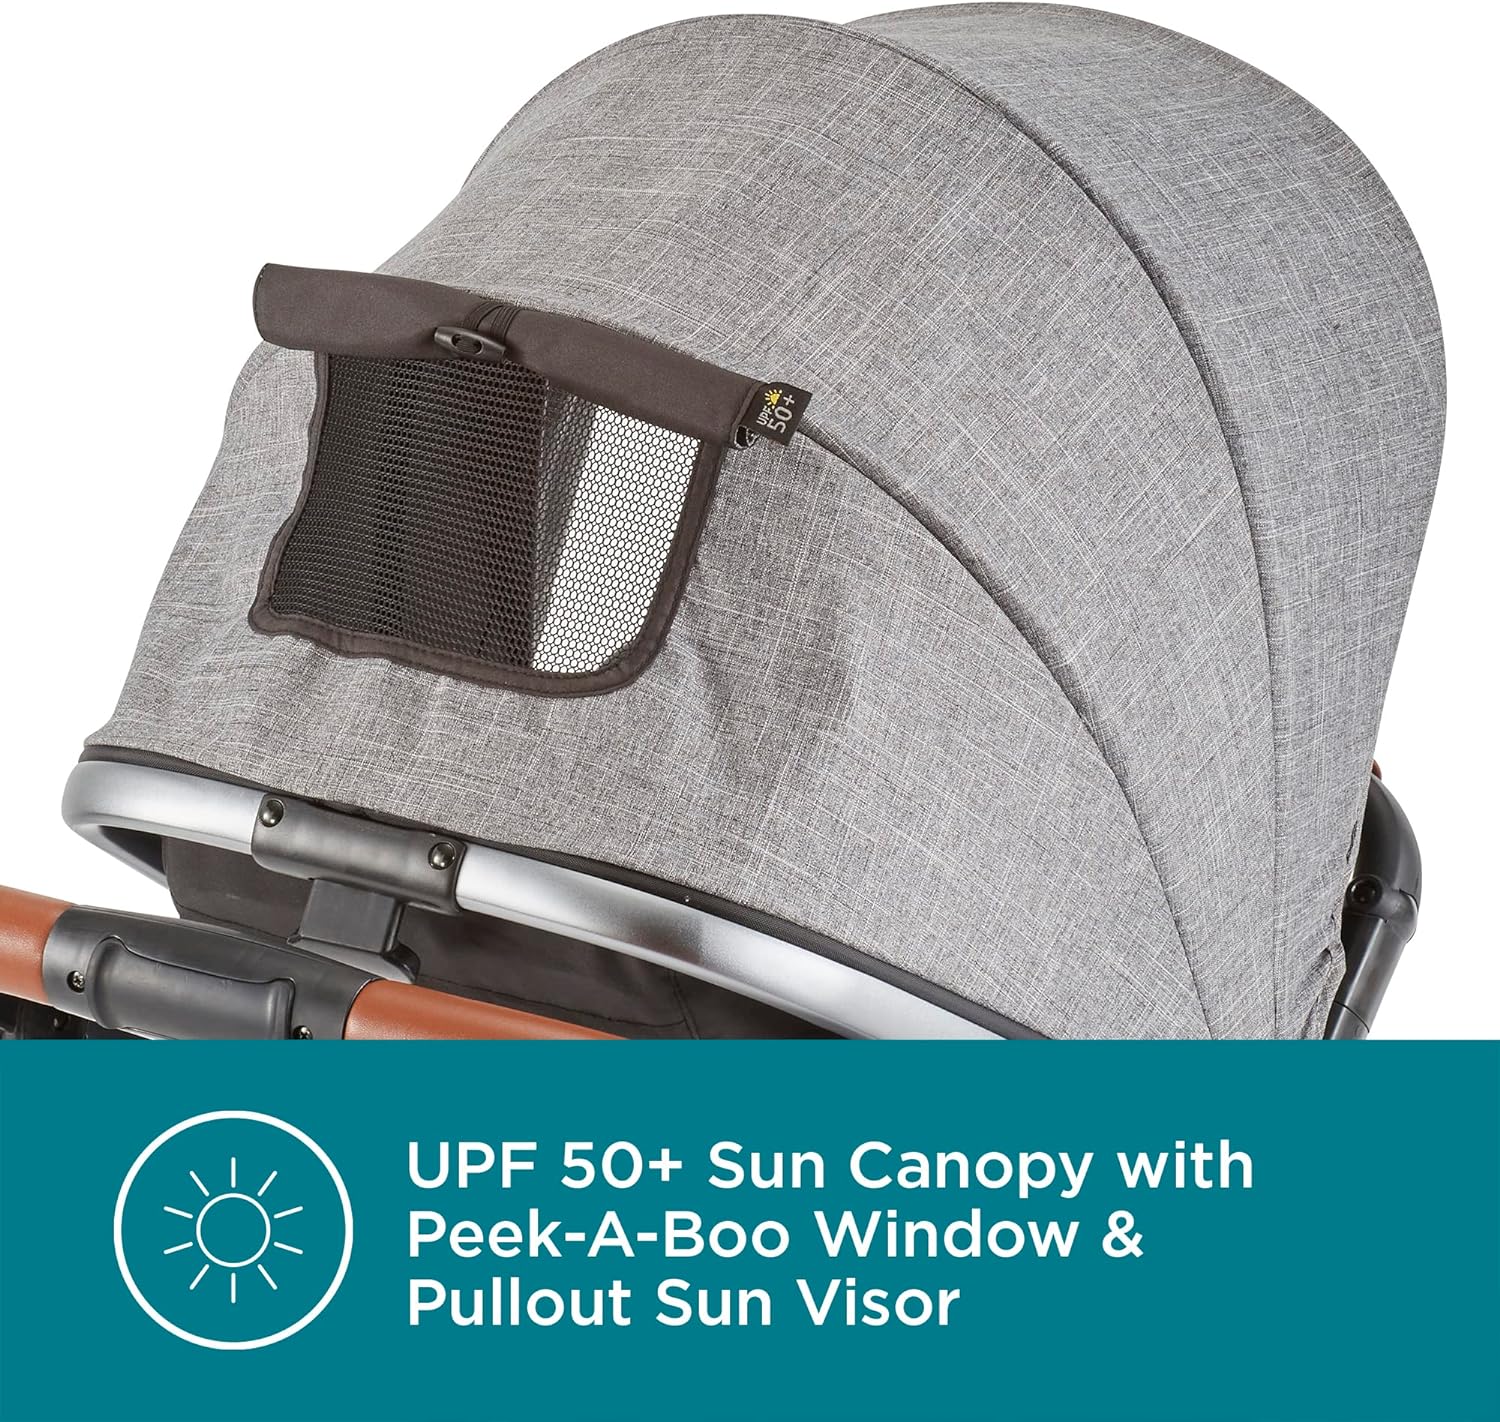 Contours Legacy Convertible Baby Stroller and Toddler Stroller Single-to-Double Options, Reversible Seats, UPF 50 Sun Canopy, Height Adjustable Handle, 5-Point Safety Harness - Graphite Gray - Contours Legacy Convertible Baby Stroller Review